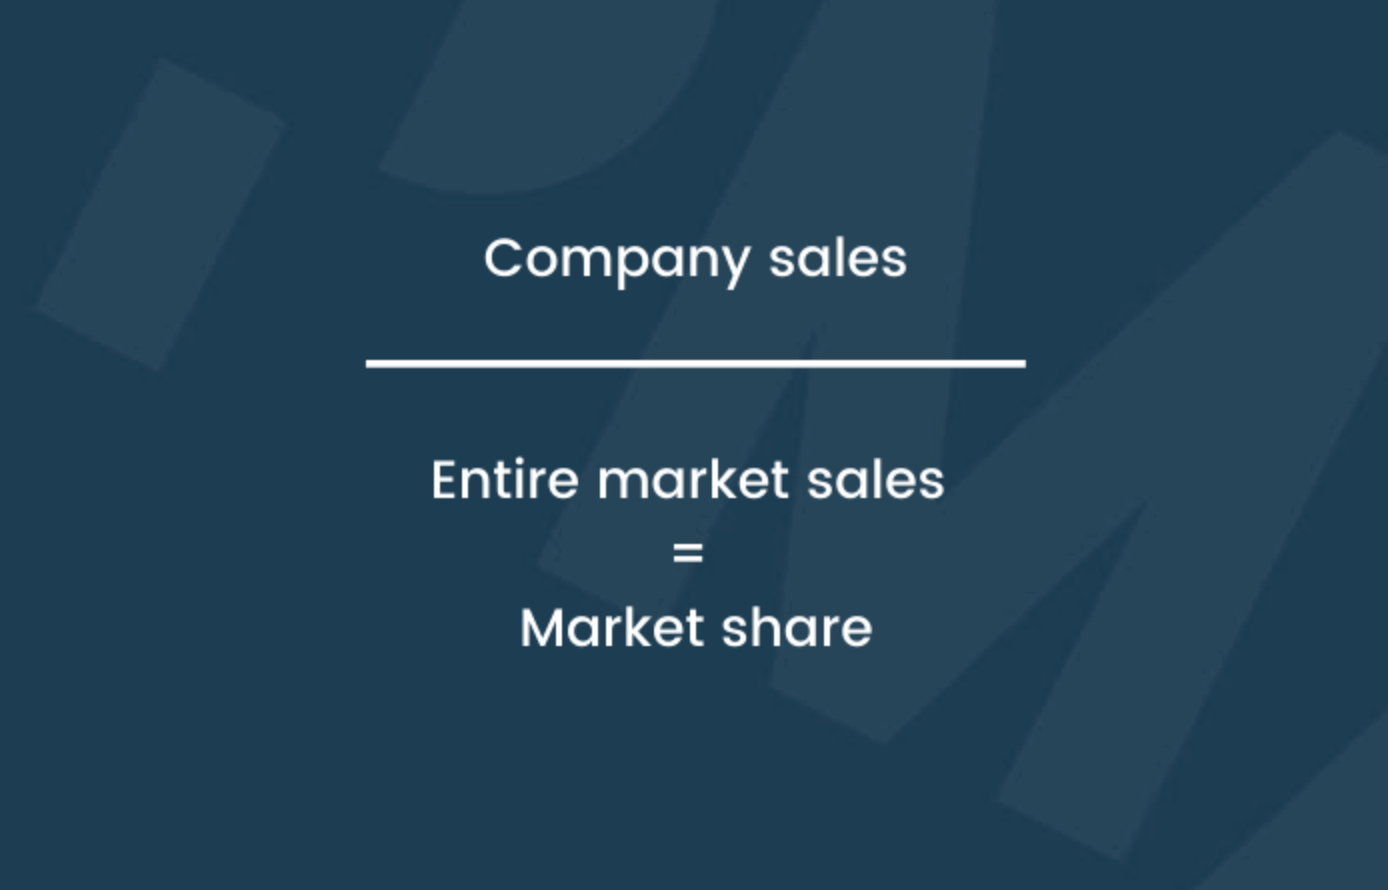 Market share formula: company sales divided by entire market sales